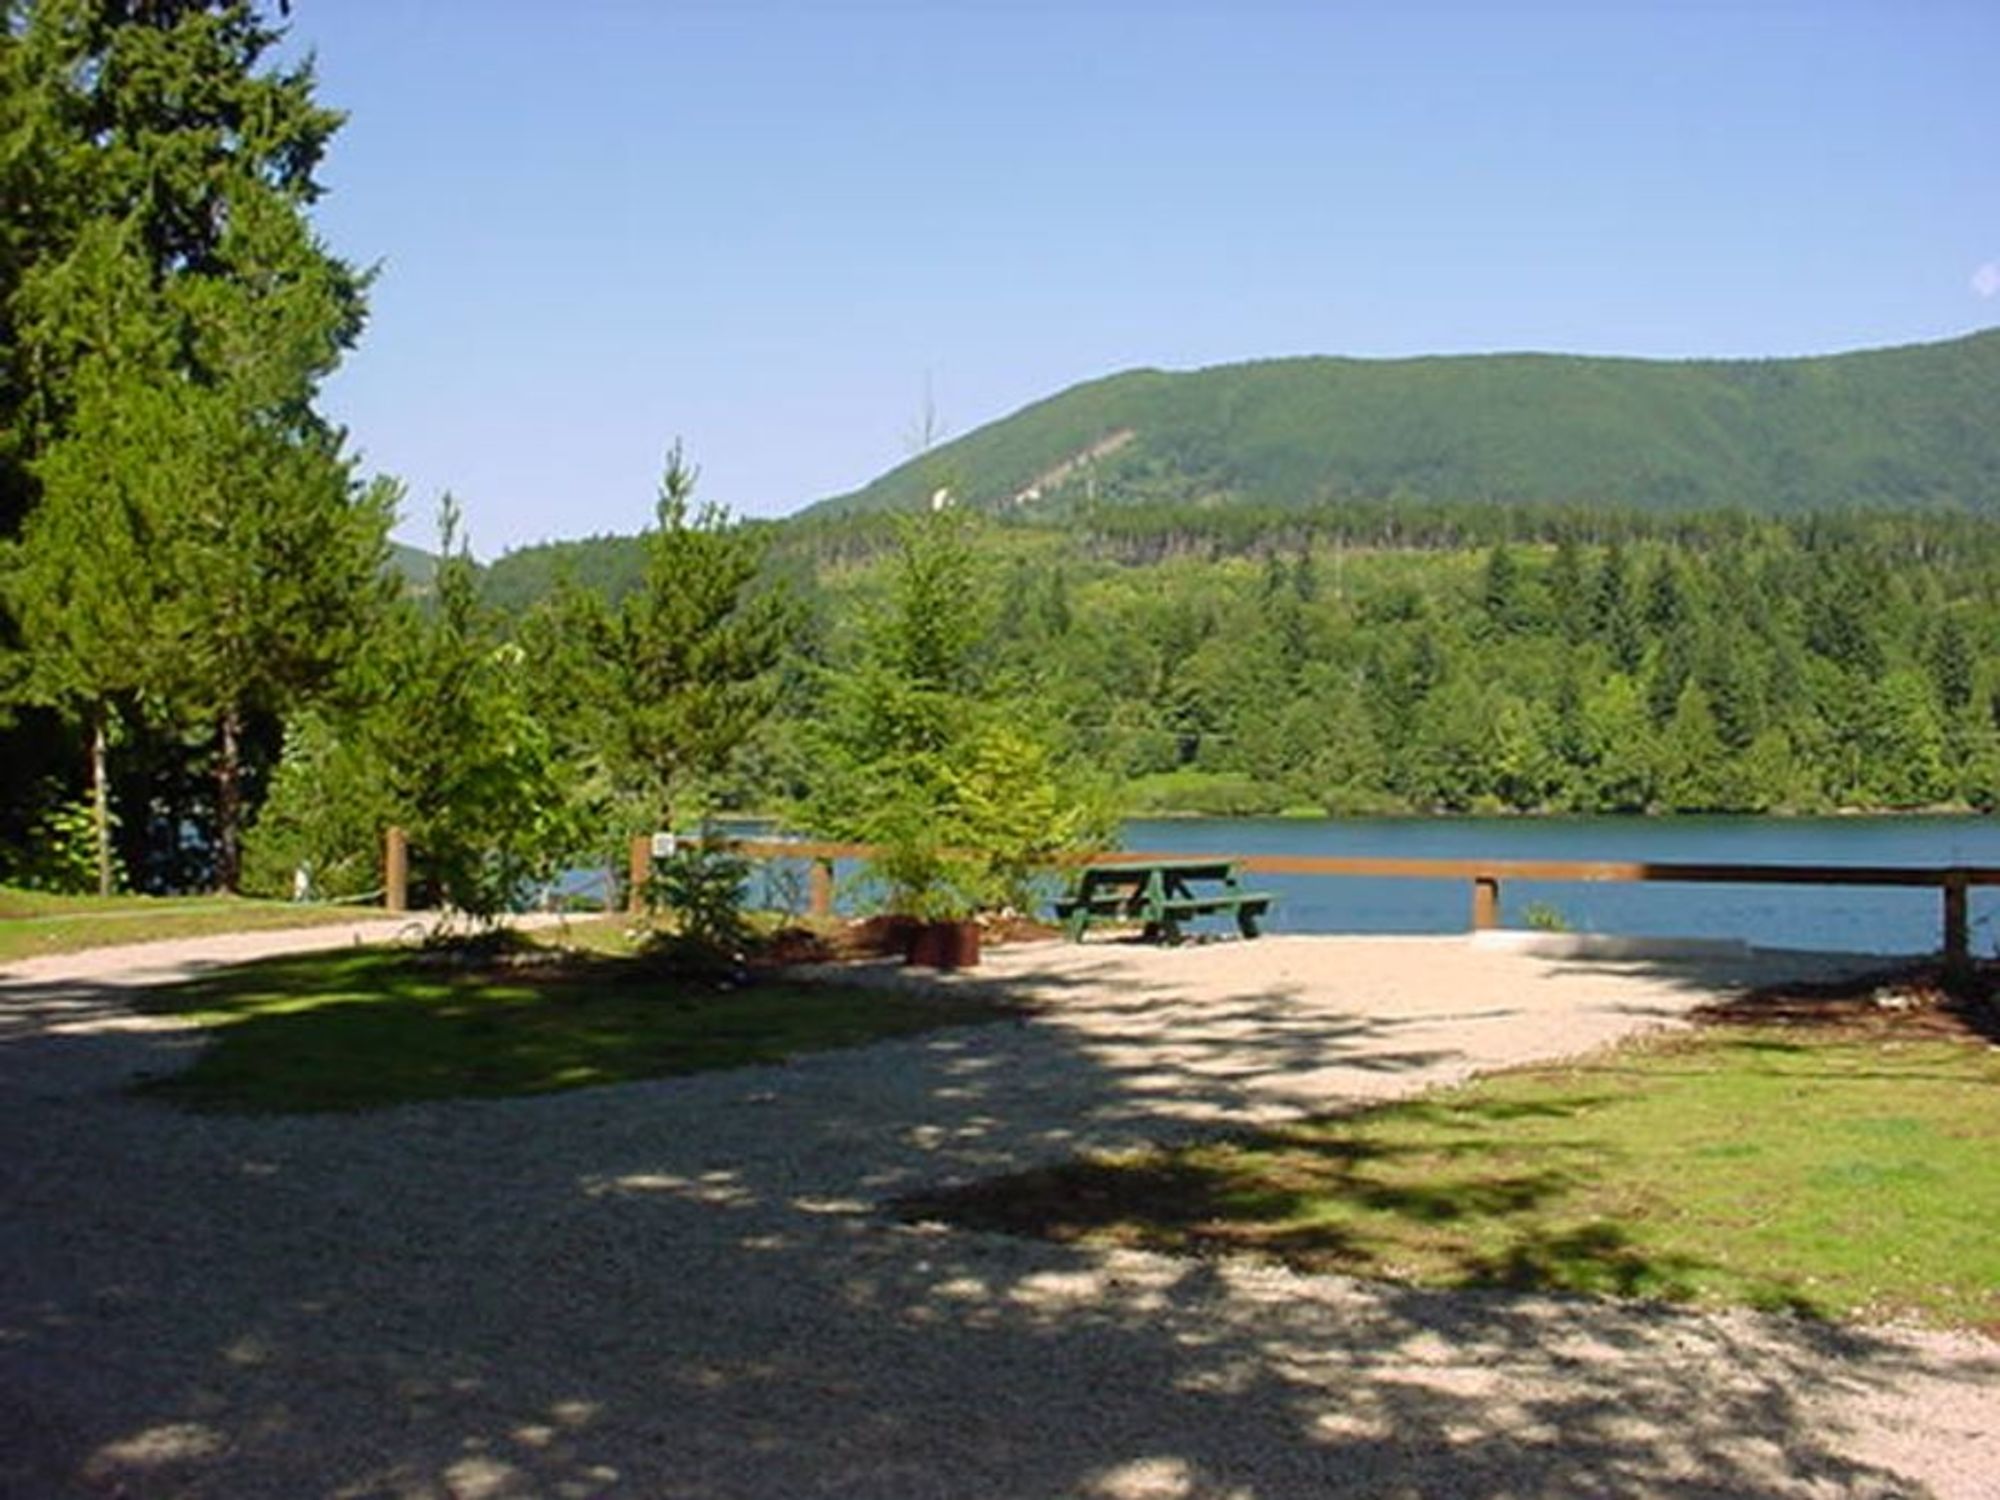 Lakeview Park Campground